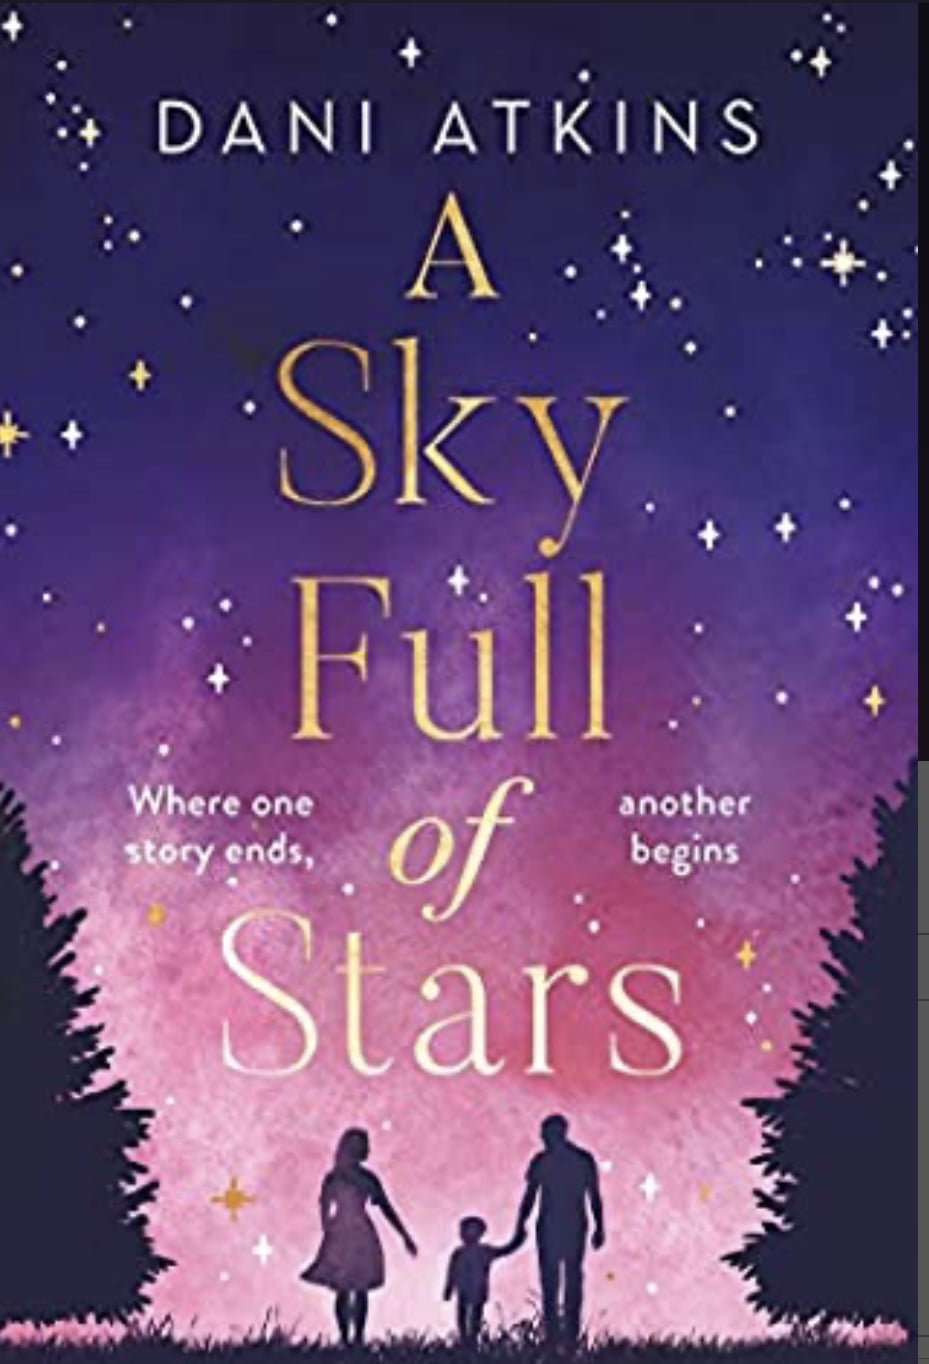 A SKY FULL OF STARS BY DANI ATKINS – BOOK REVIEW